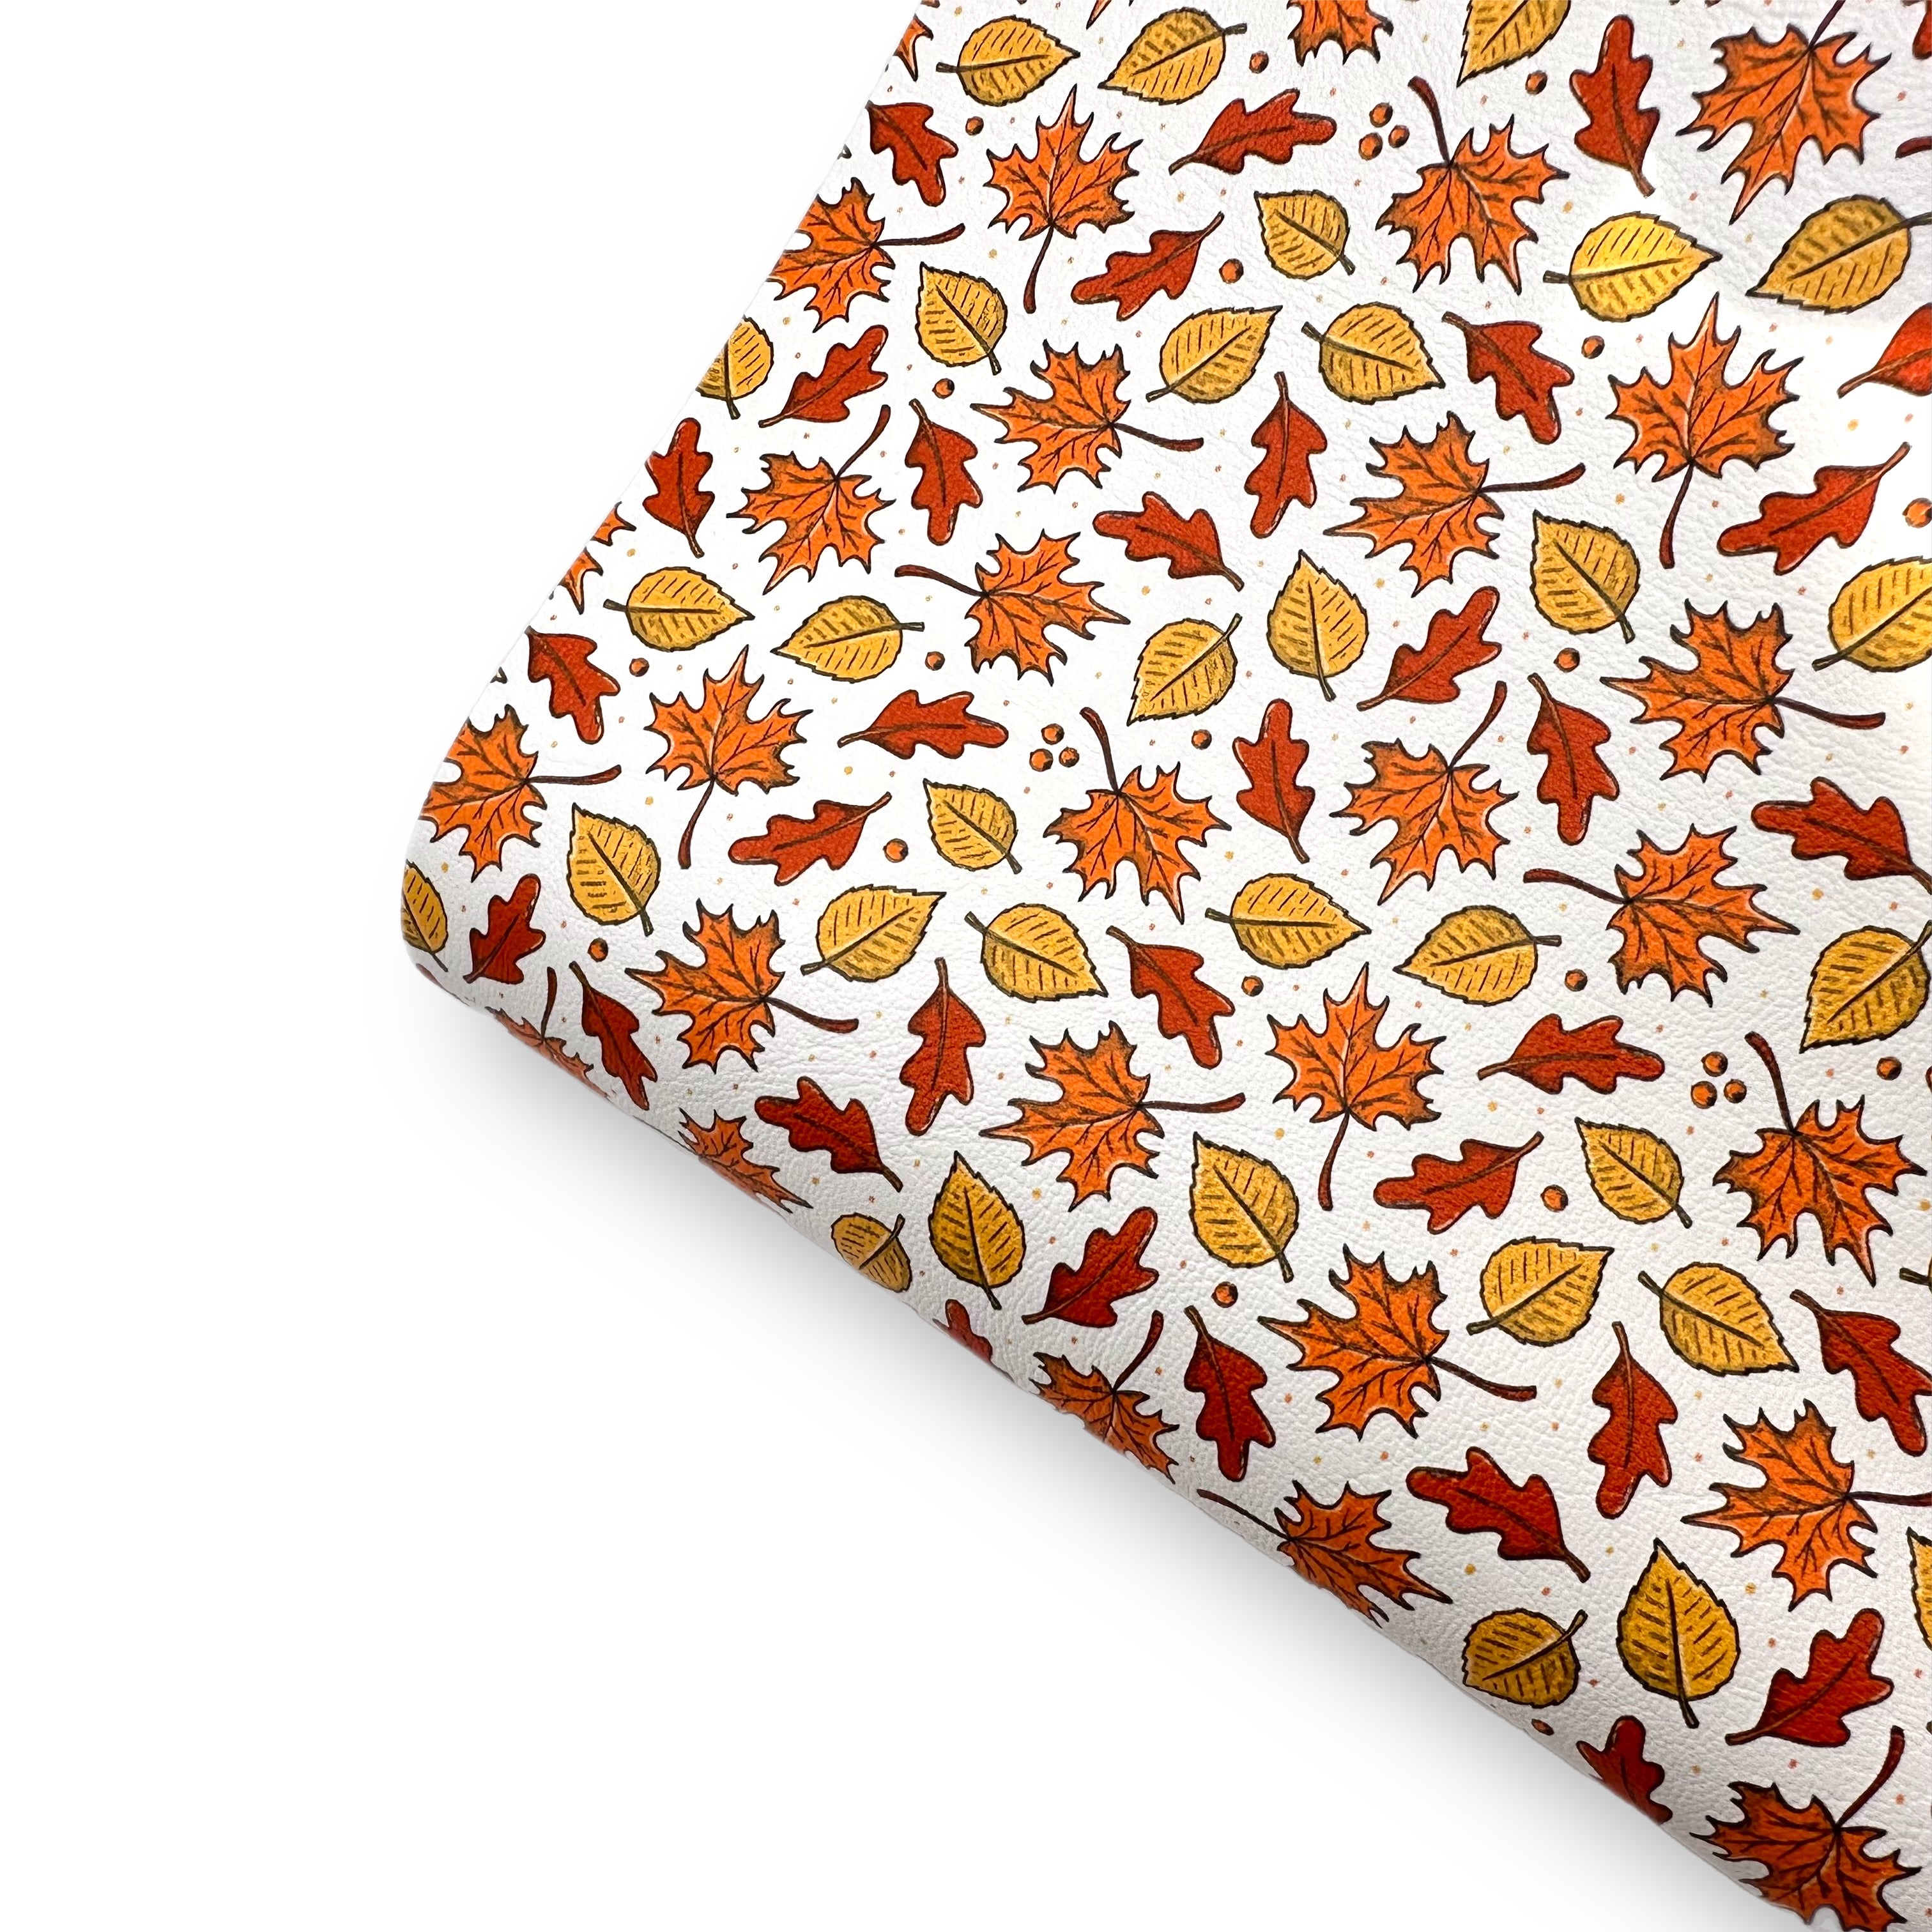 Falling Leaves Premium Faux Leather Fabric Sheets